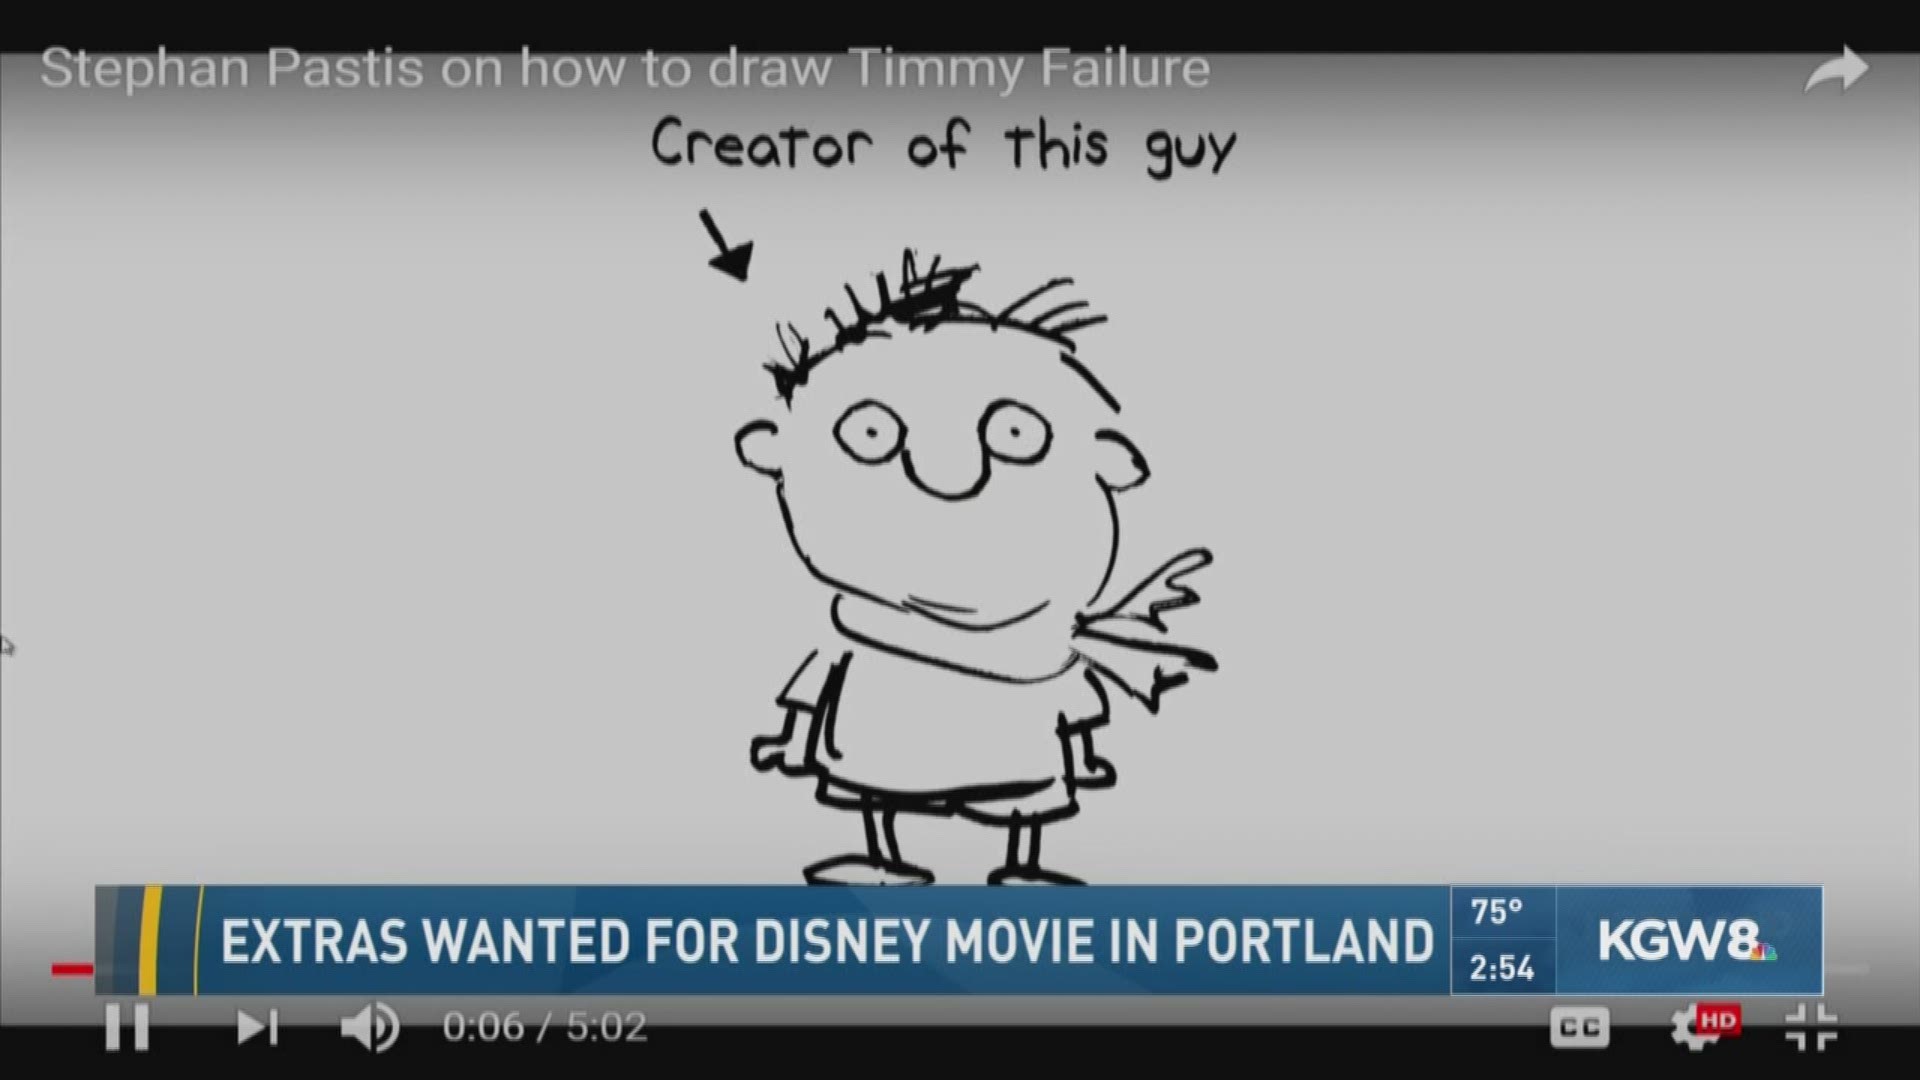 Extras wanted for Disney movie in Portland